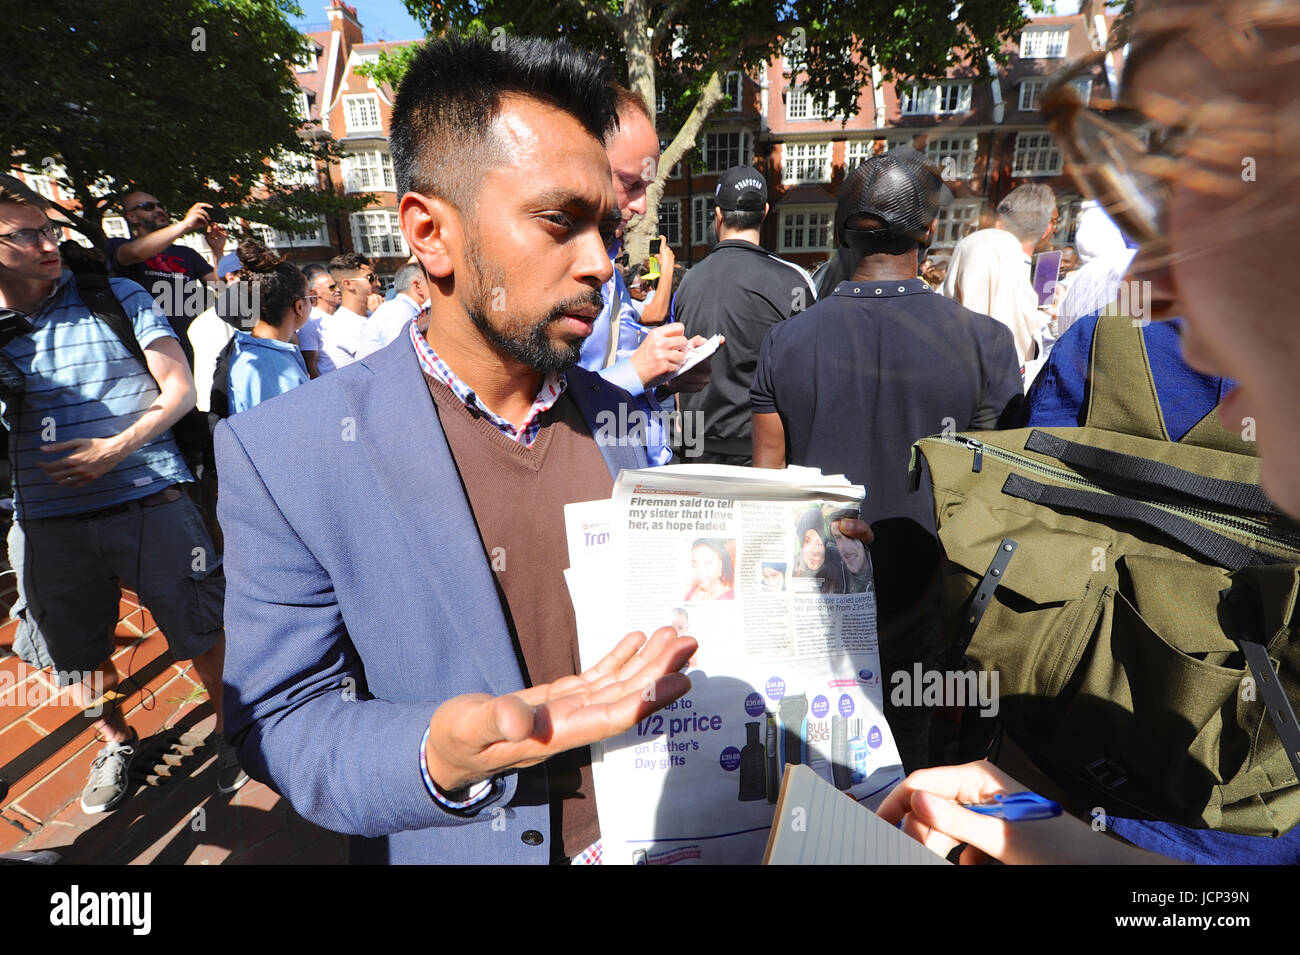 London, UK. 16th June, 2017. Mustafa al-Mansur, protest organiser and one of the people searching for friends who were caught up in the fire outside the offices of Kensington & Chelsea Council. Mr al-Mansur is holding a copy of Metro showing the picture of his friend Rania Ibrham who was caught in the fire with her two children and is still missing. Credit: Michael Preston/Alamy Live News Stock Photo